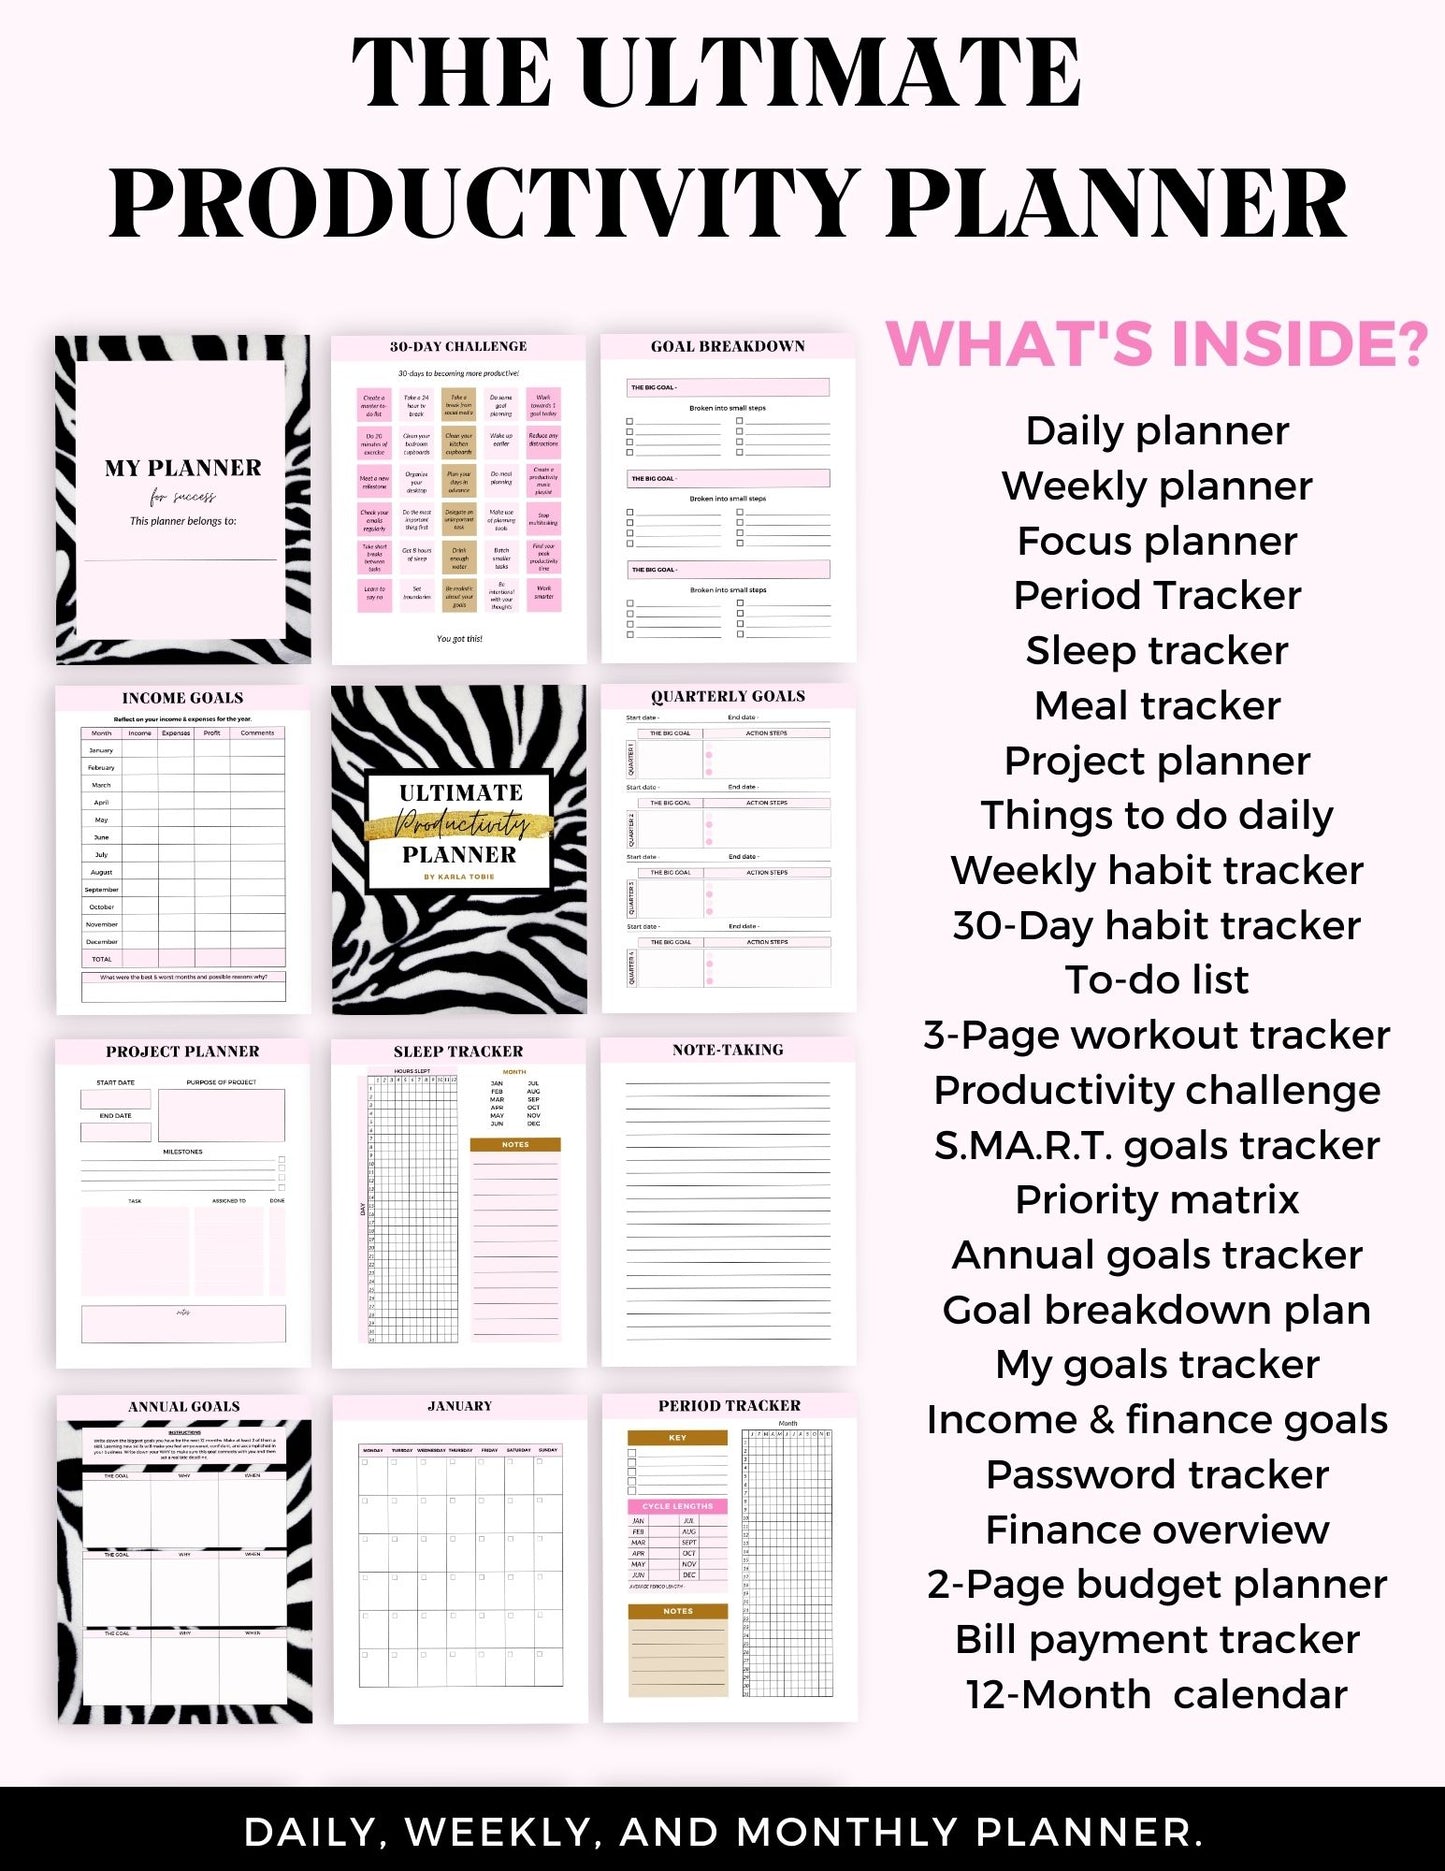 The Ultimate Productivity Planner